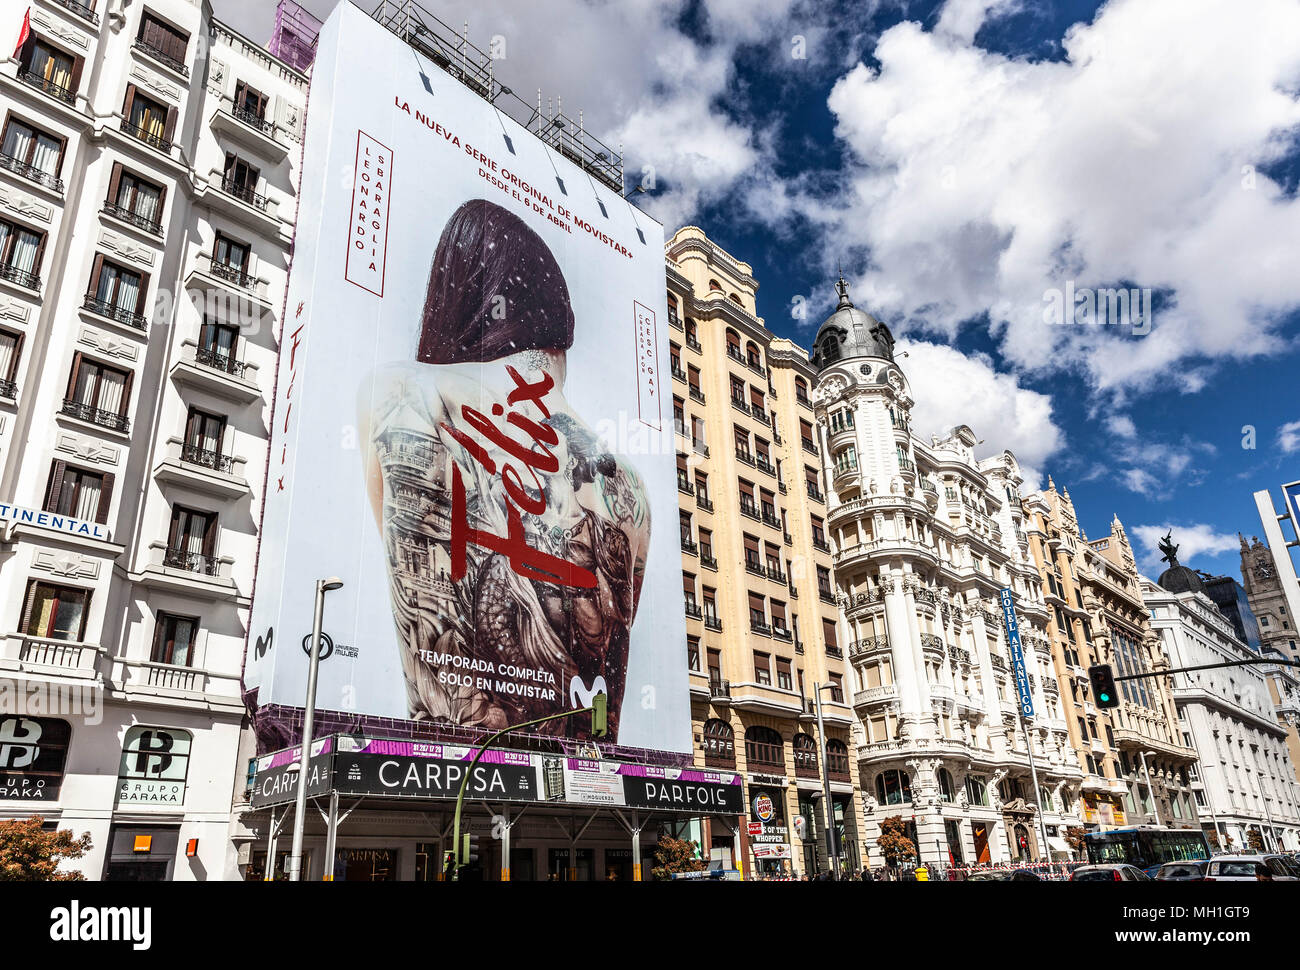 Giant billboard covering the scaffolding on a building front, Gran Via, Madrid, Spain. Stock Photo